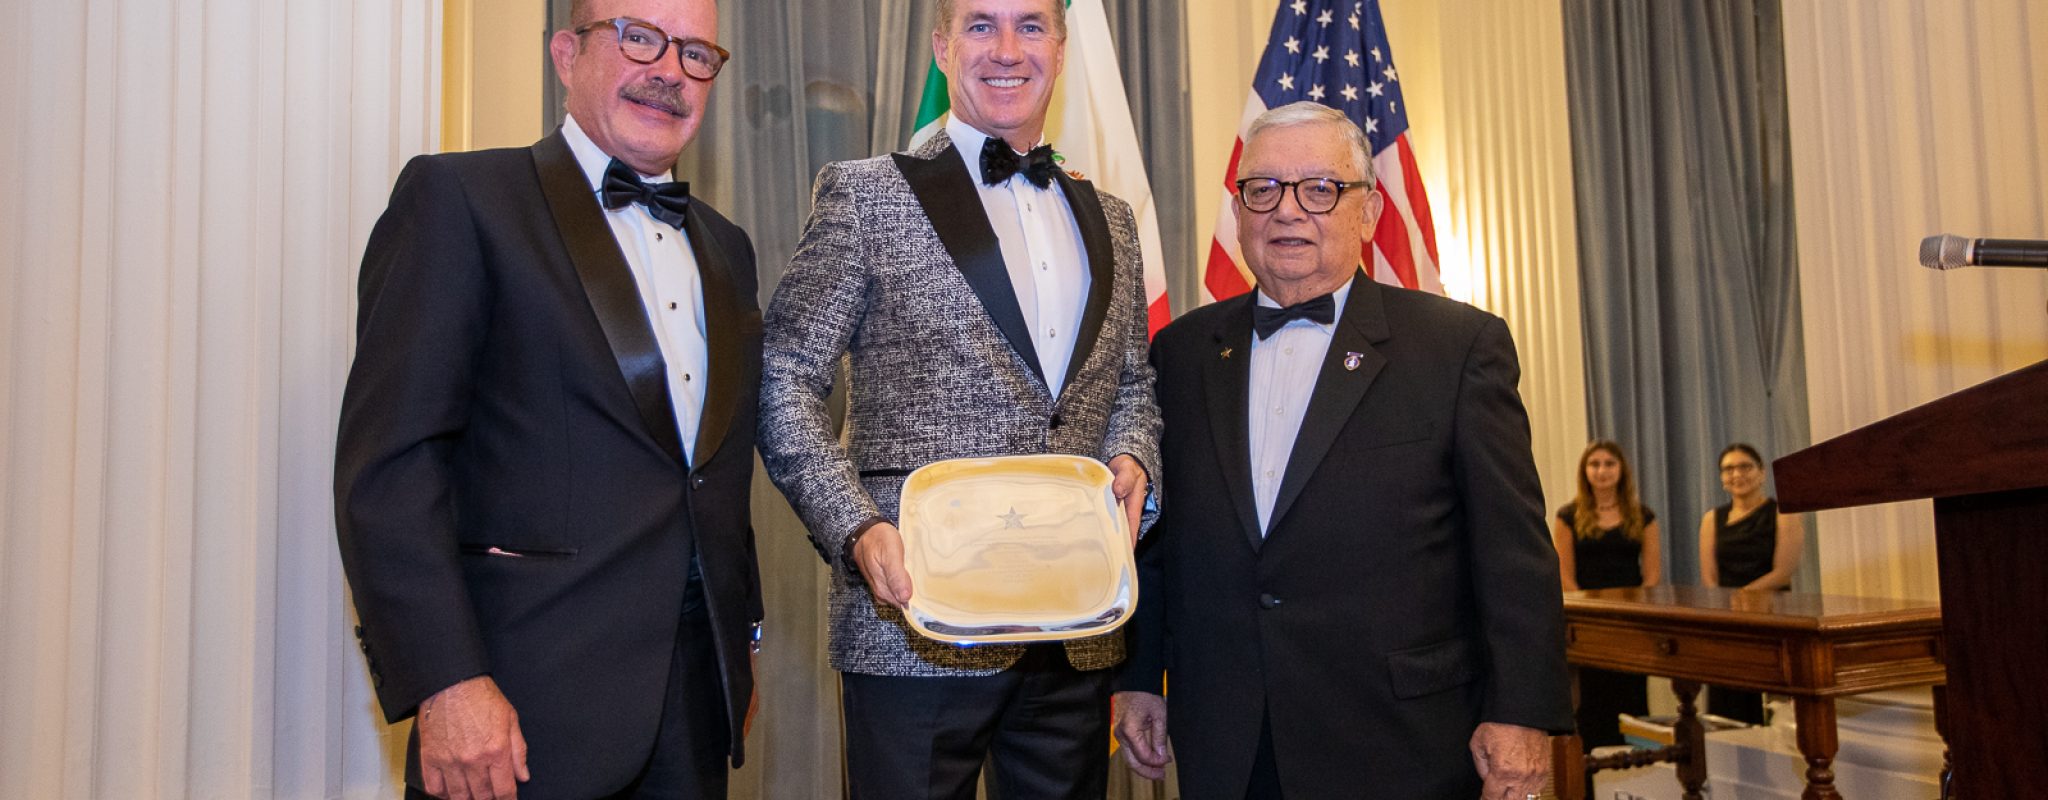 THE UNITED STATES-MEXICO CHAMBER OF COMMERCE CELEBRATES ITS 50TH ANNIVERSARY AND GOOD NEIGHBOR AWARDS GALA IN WASHINGTON, D.C.